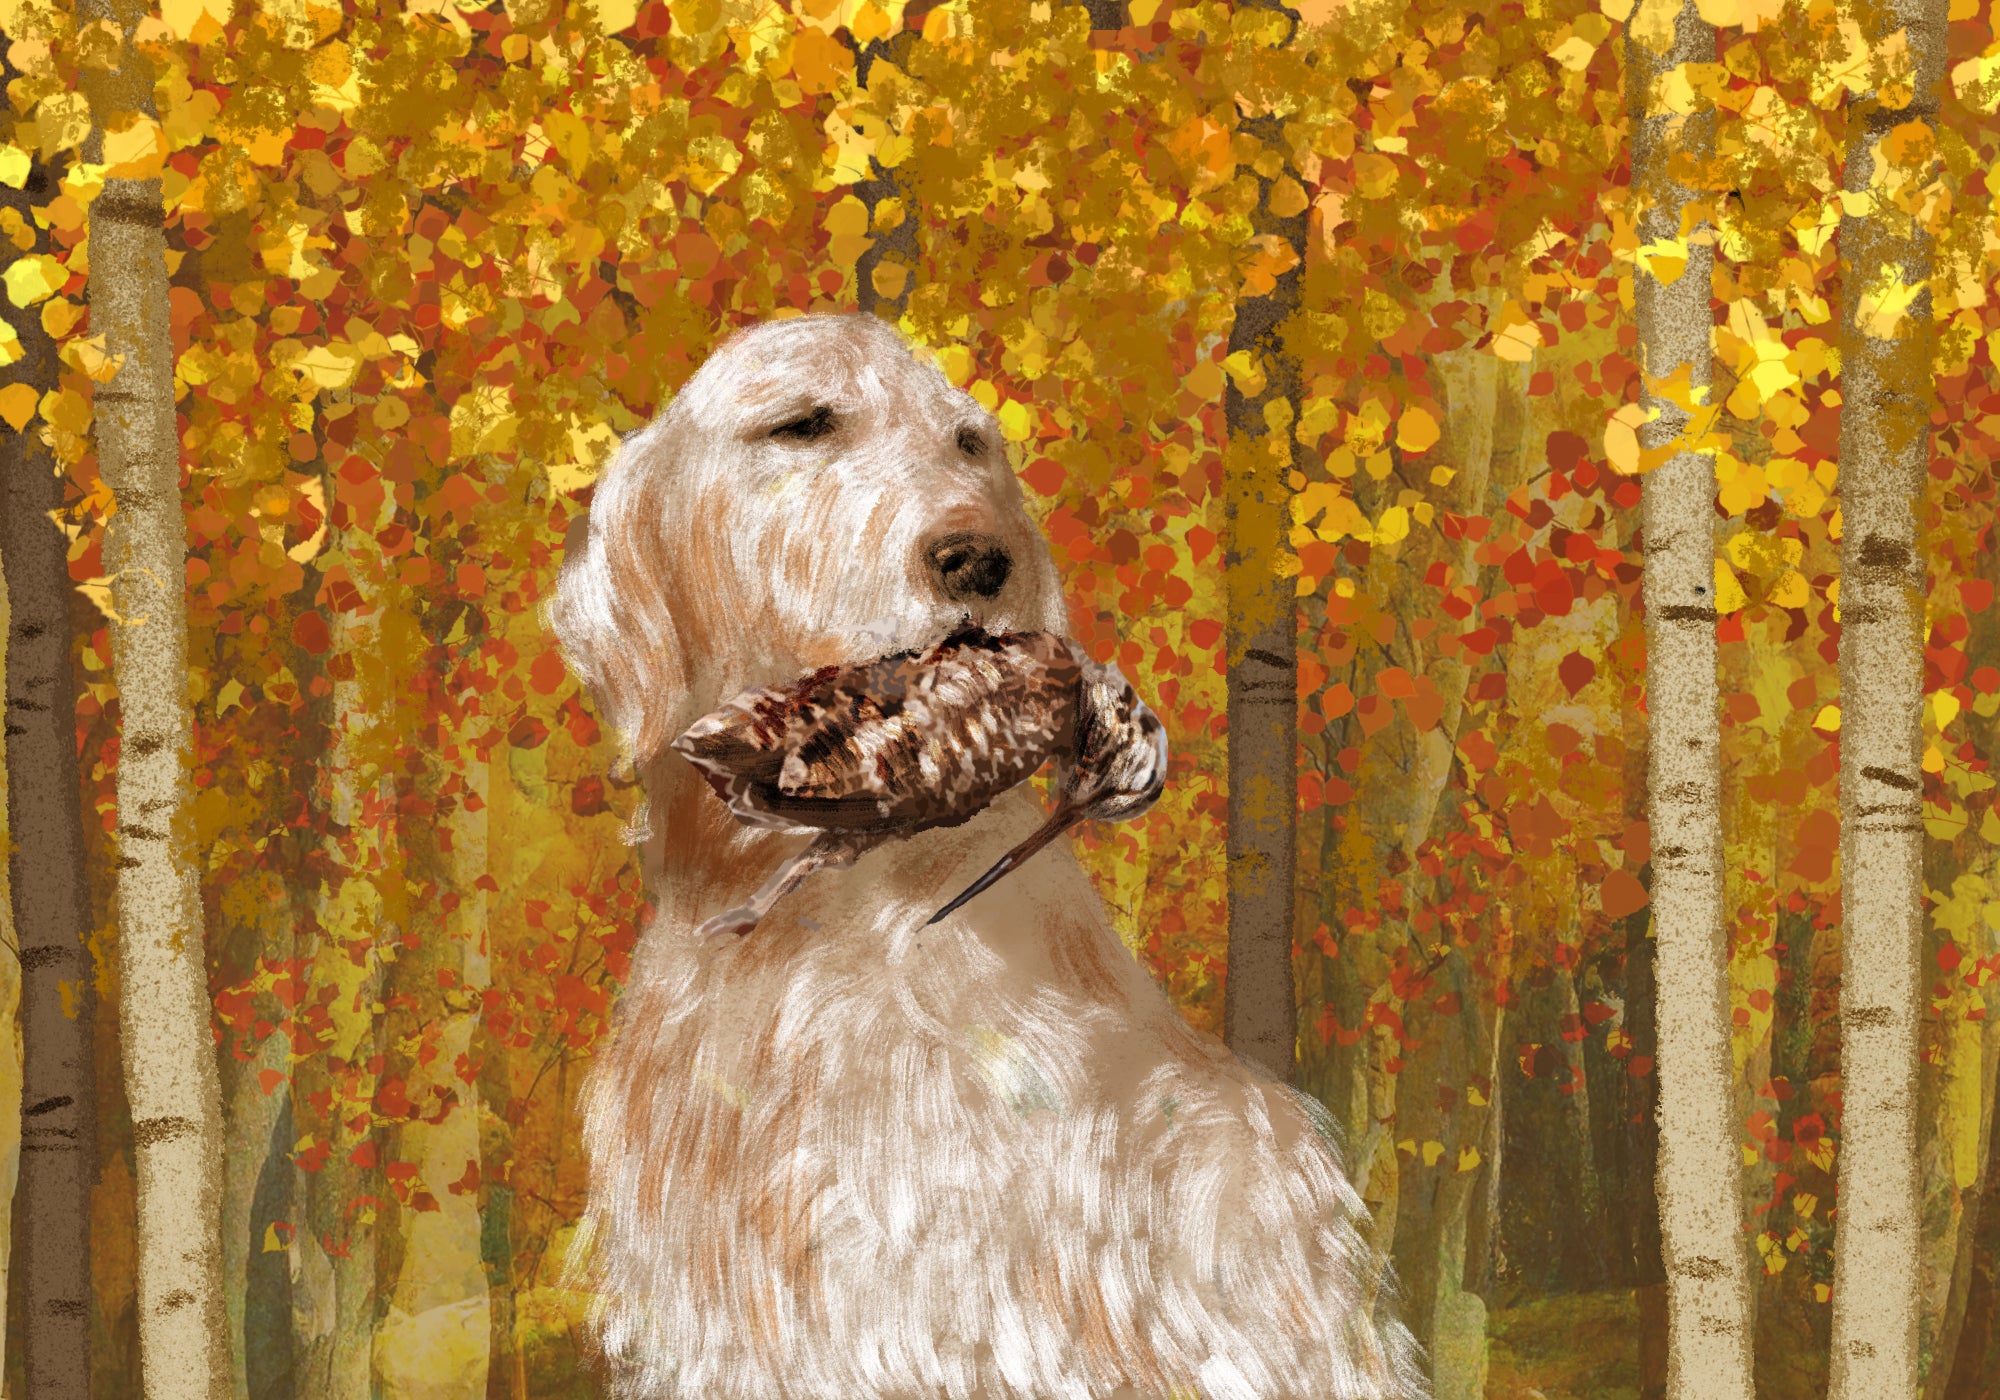 setter with woodcock in mouth illustration